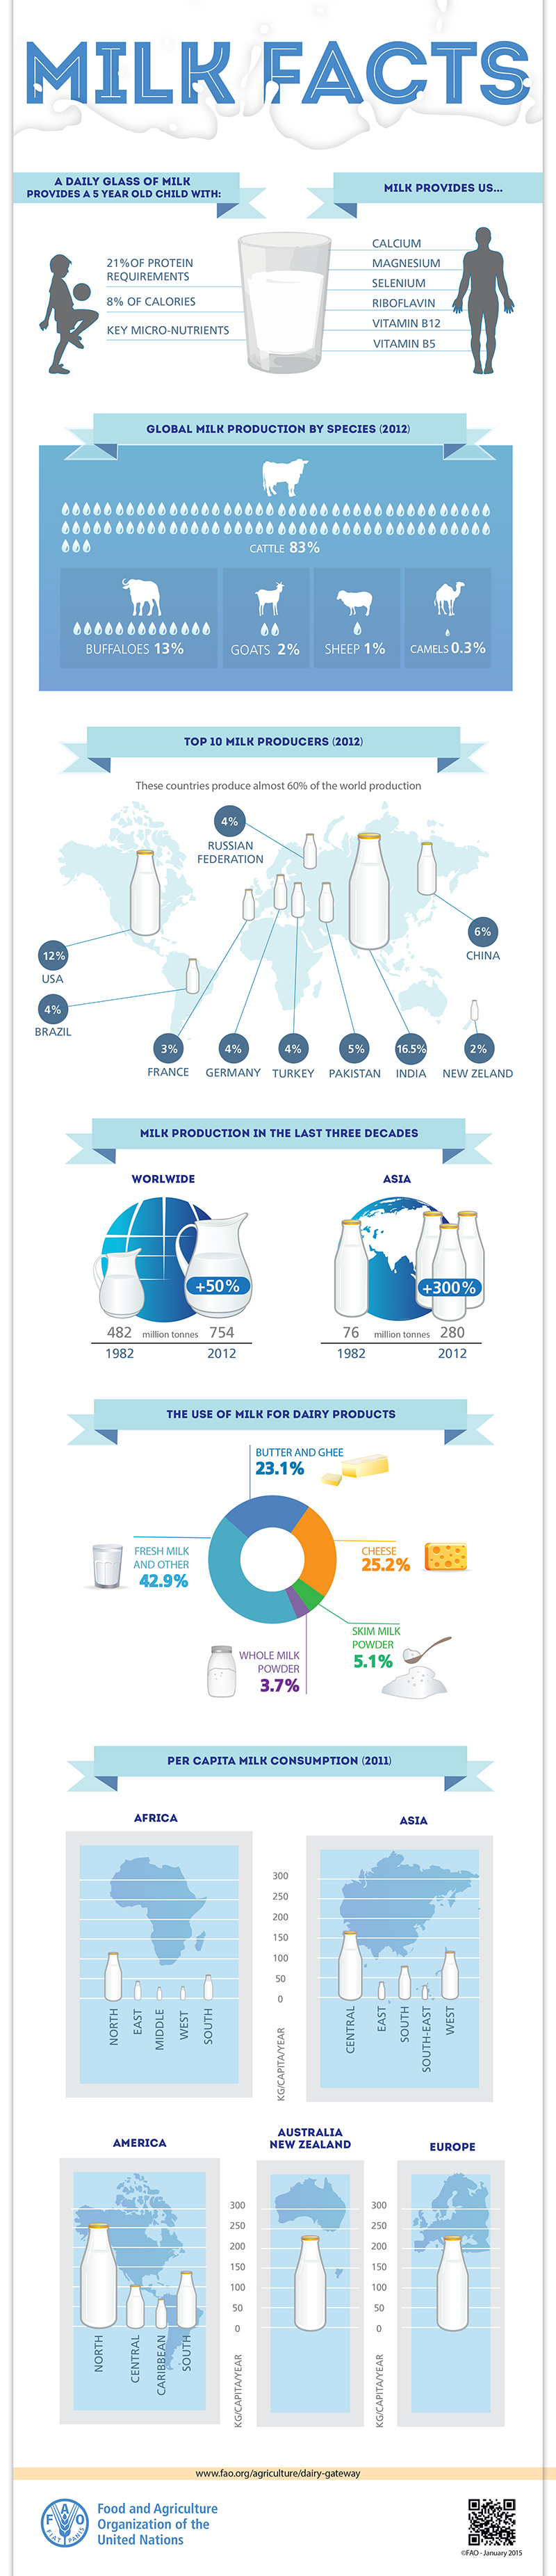 Global Milk Production Facts